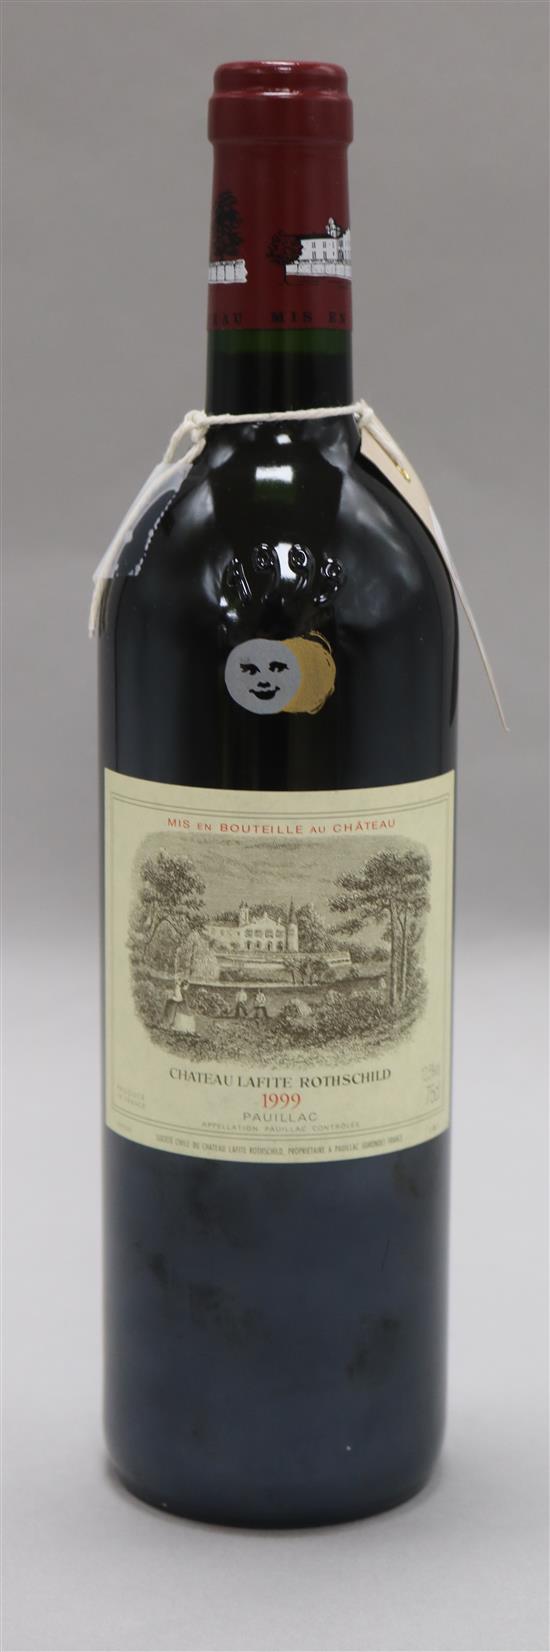 A bottle of Chateau Lafite Rothschild 1999 Pauillac